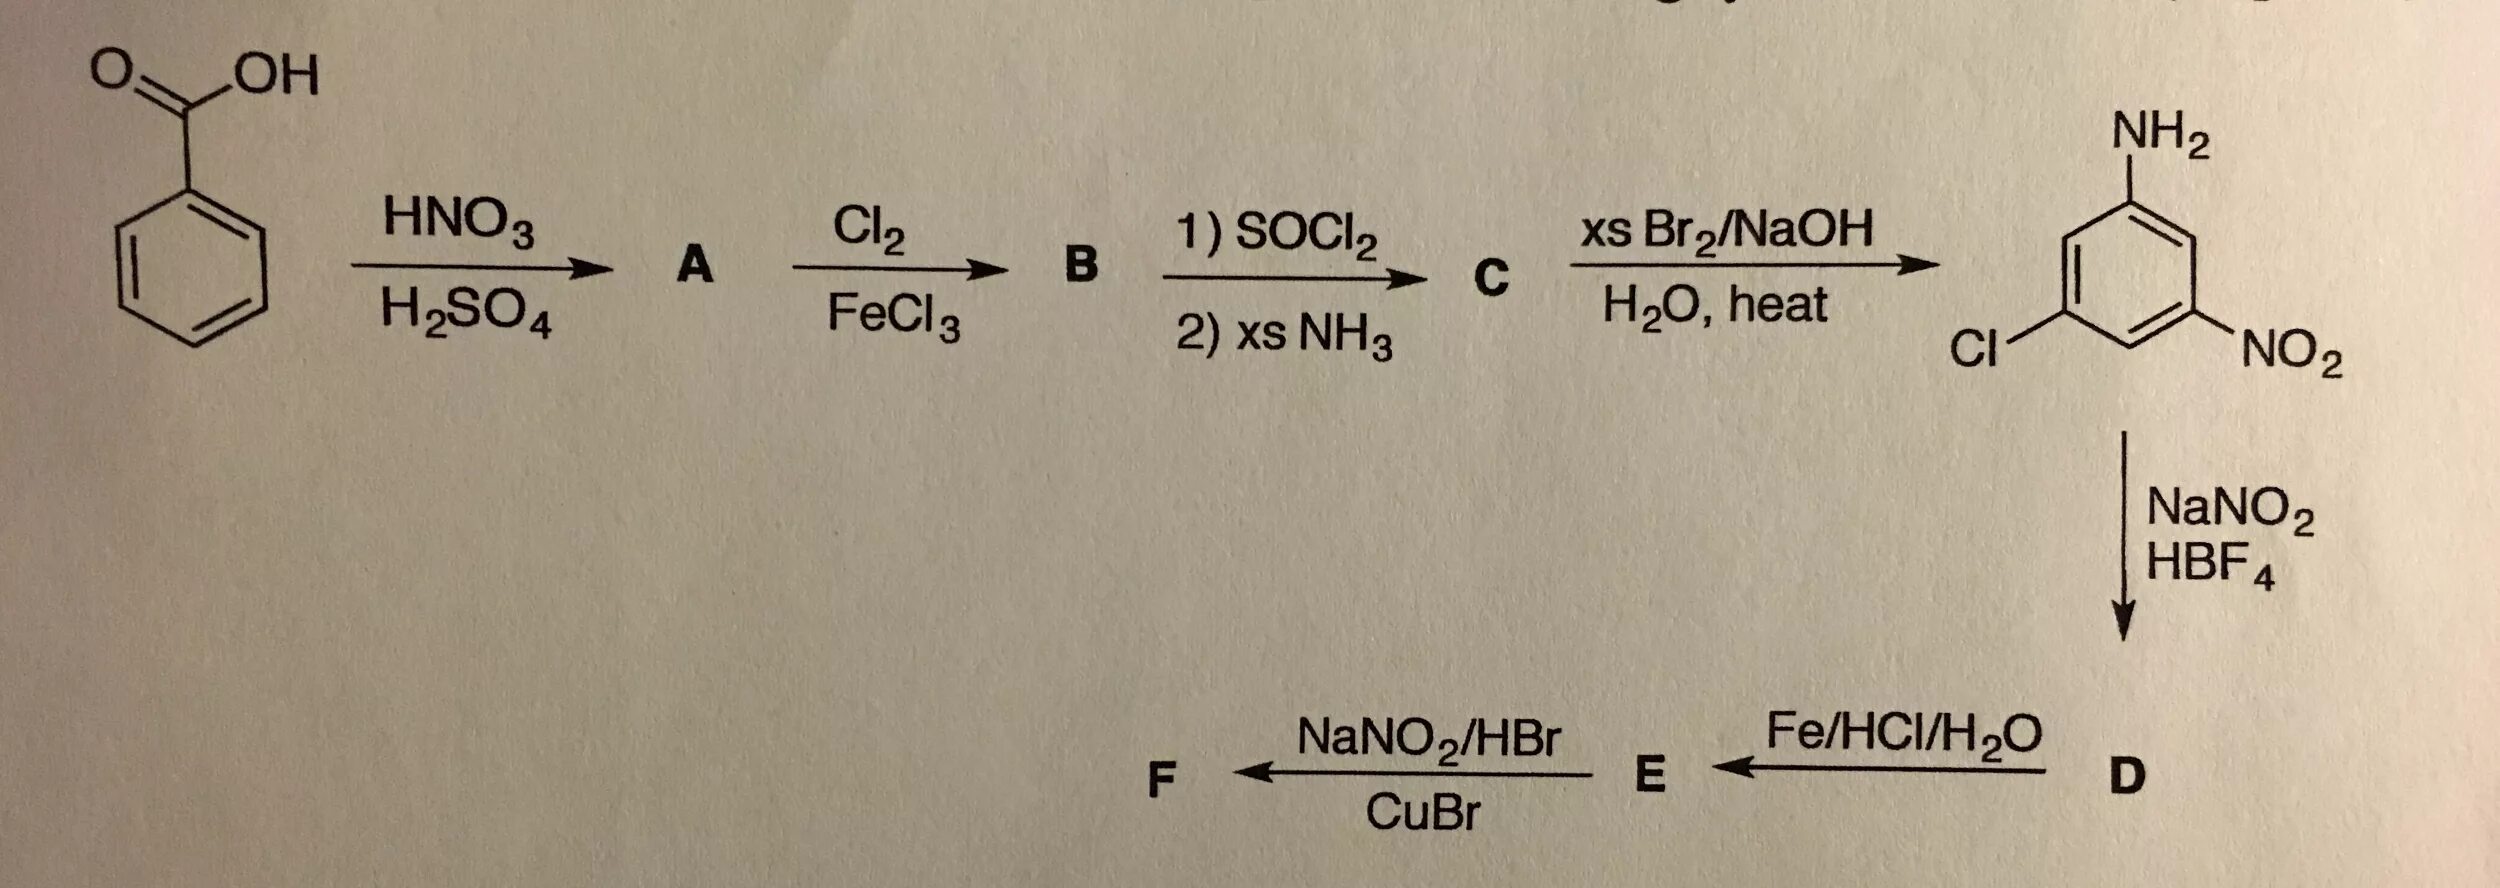 Ch3nh3br + hno2. Бензол hno2. Метилбензол + 2cl2 al2o3. Hno3 h2so4. Co2 br2 реакция